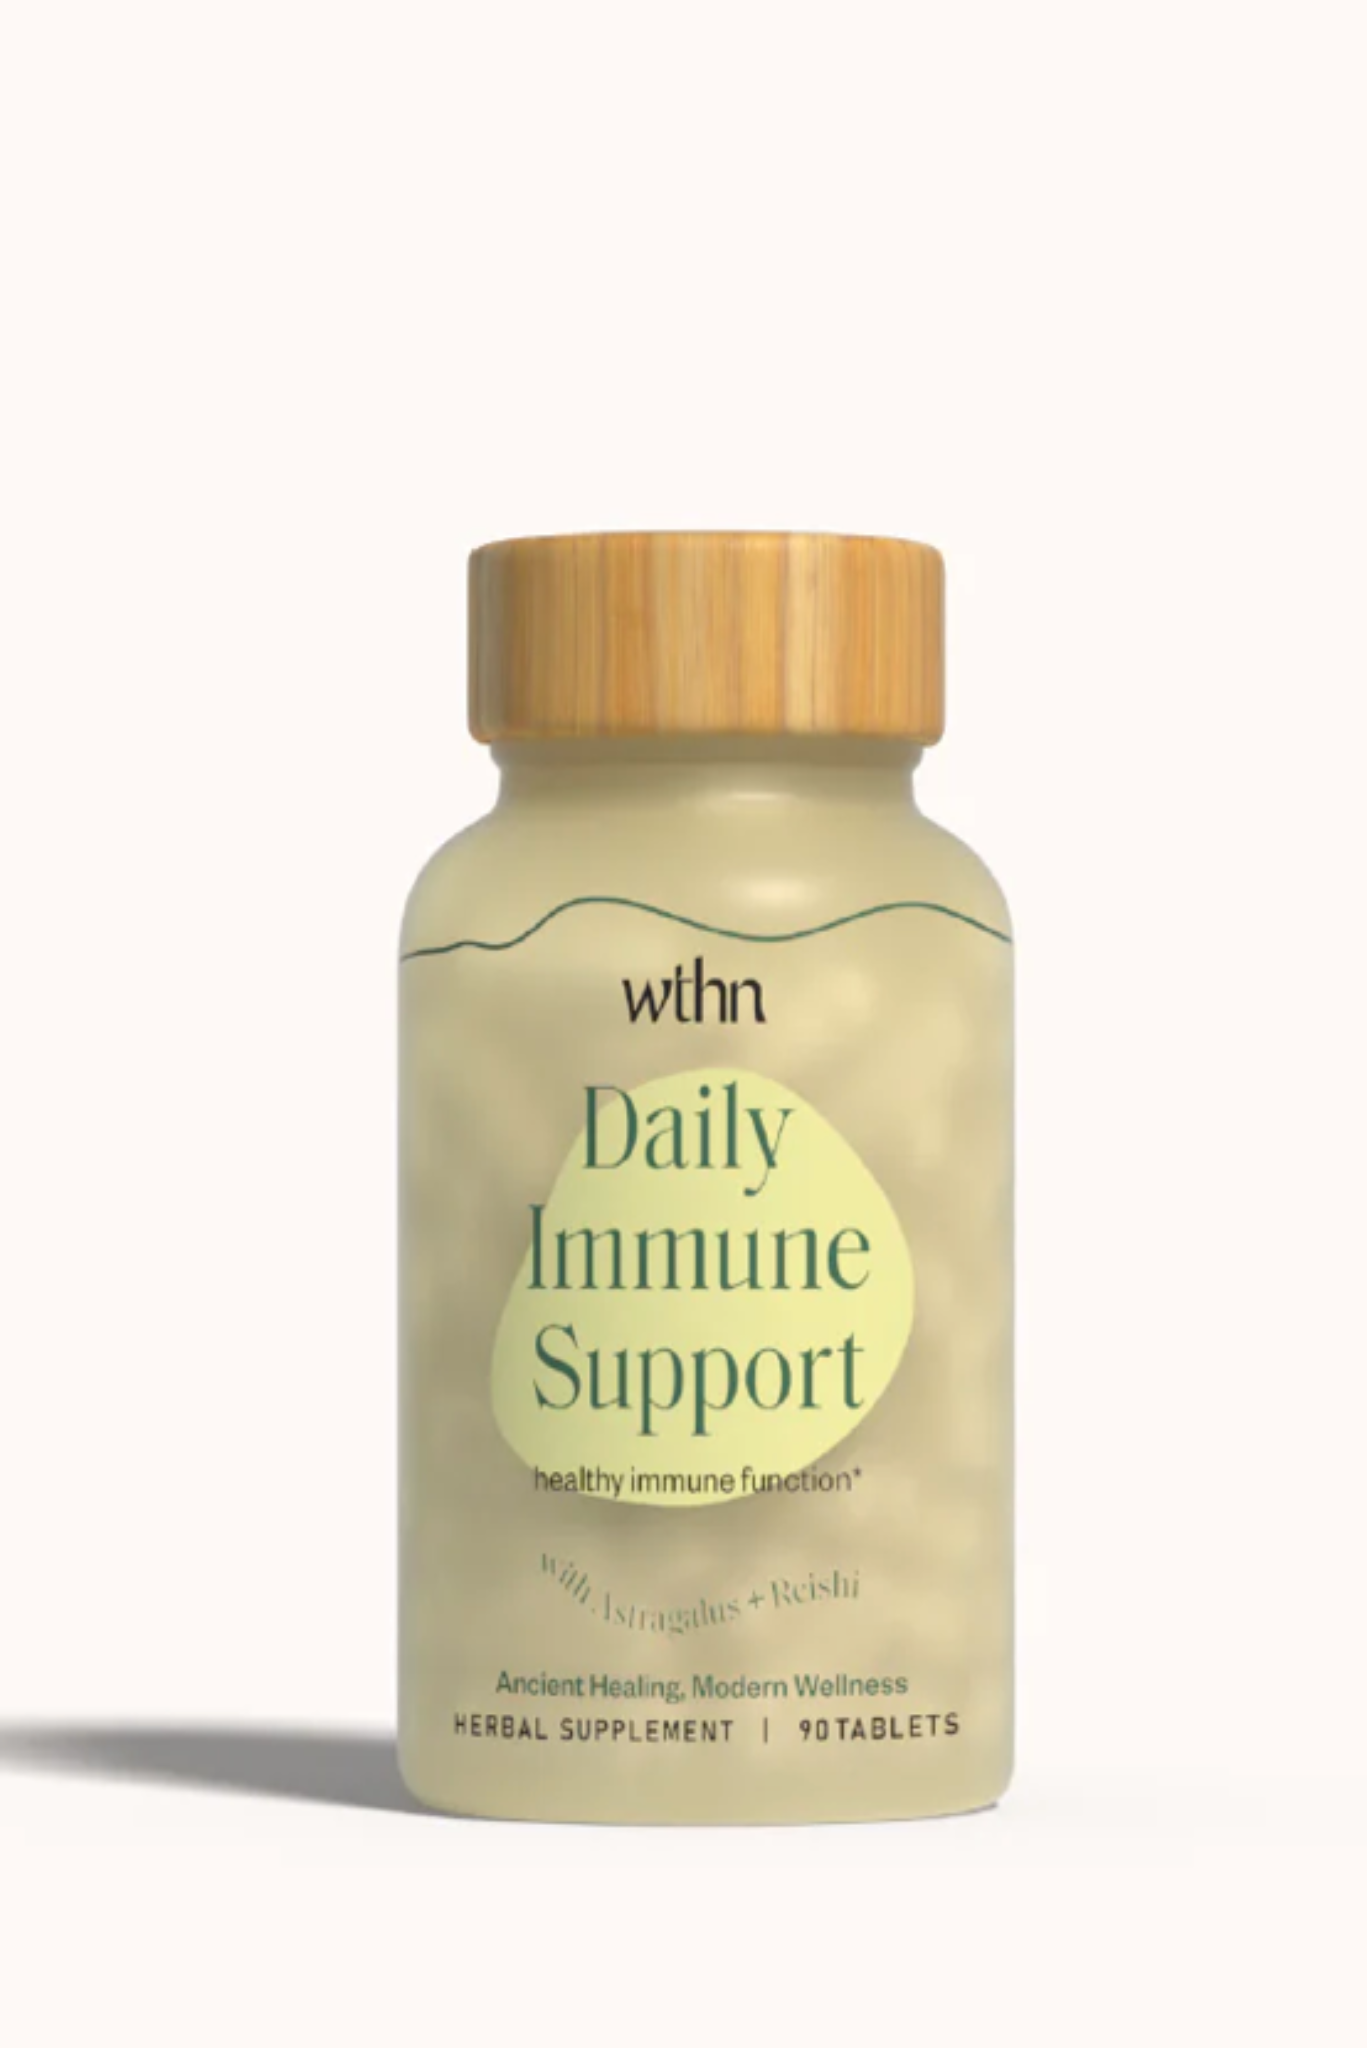 Daily Immune Support